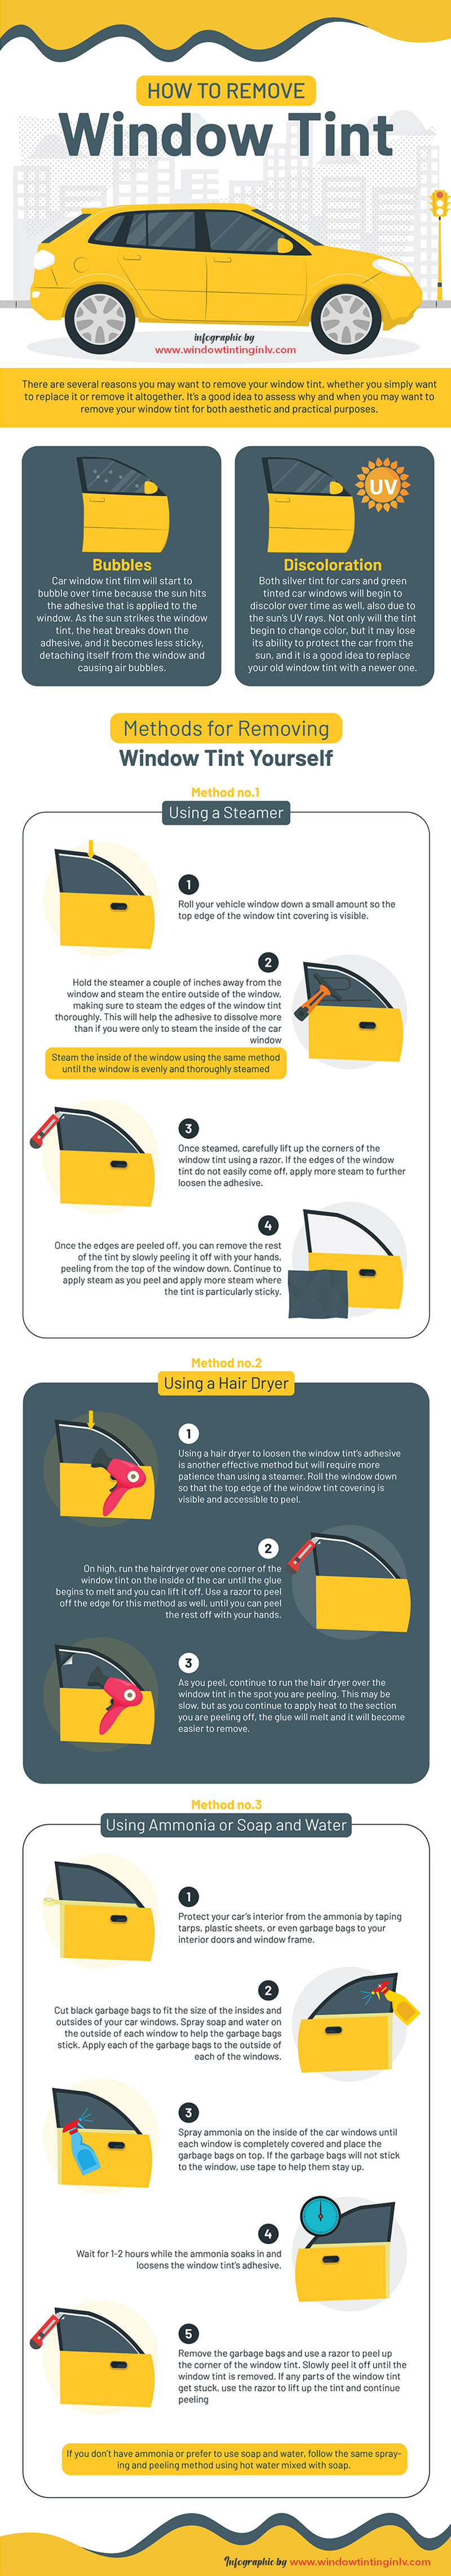 how to remove window tint from cars infographic